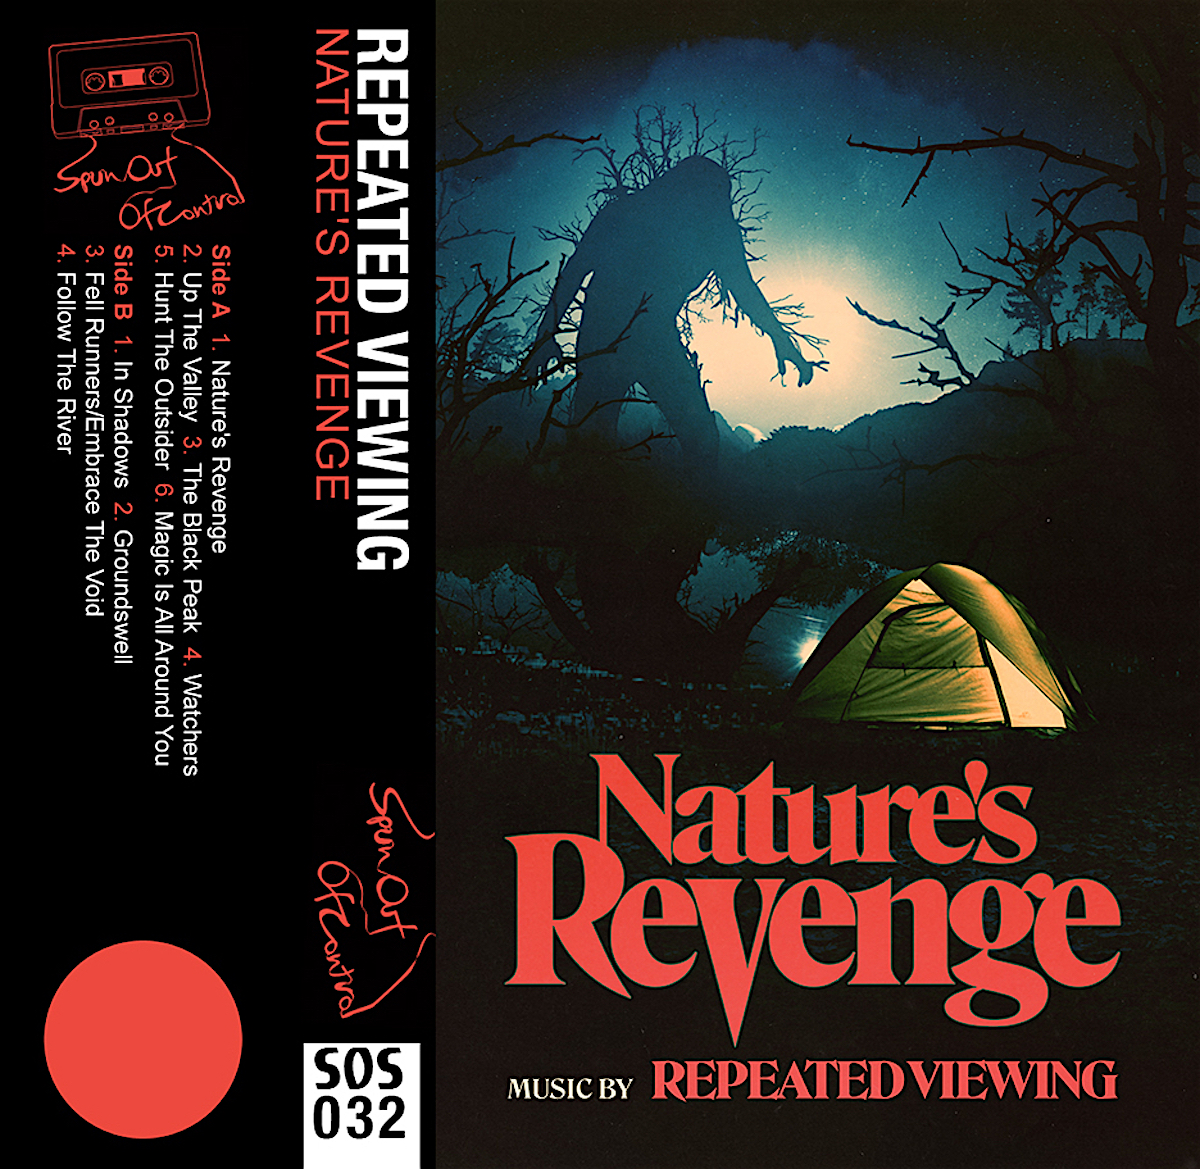 Repeated Viewing Natures Revenge Spun Out Of Control cassette.jpg